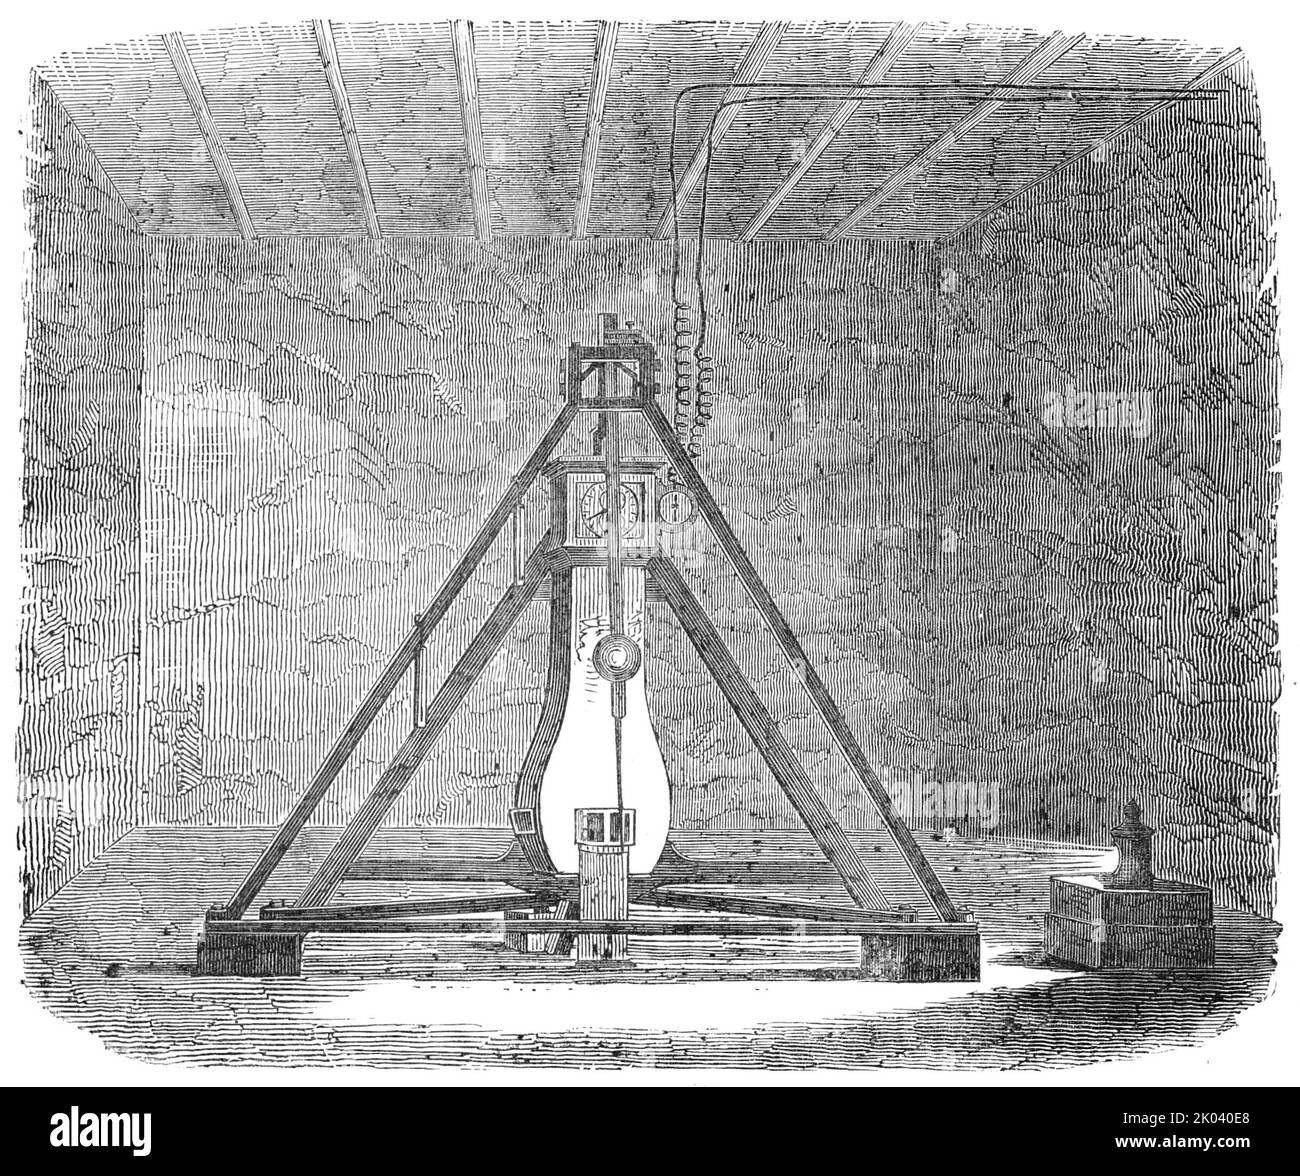 Pendulum-Room at the Bottom of the Harton Coal-Pit, 1854. Experiment to determine the weight of the Earth. 'The apparatus consists of two astronomical clocks with compensation pendulums, two invariable pendulums (Kater's) suspended...immediately in front of the clock pendulums. An astronomical clock, and an invariable pendulum were placed at each station with barometer and thermometer attached, which were regularly observed, so that the necessary corrections might be made for atmospheric resistance, variations of temperature, &amp;c. There was also at each station a galvanic-signal-needle...co Stock Photo